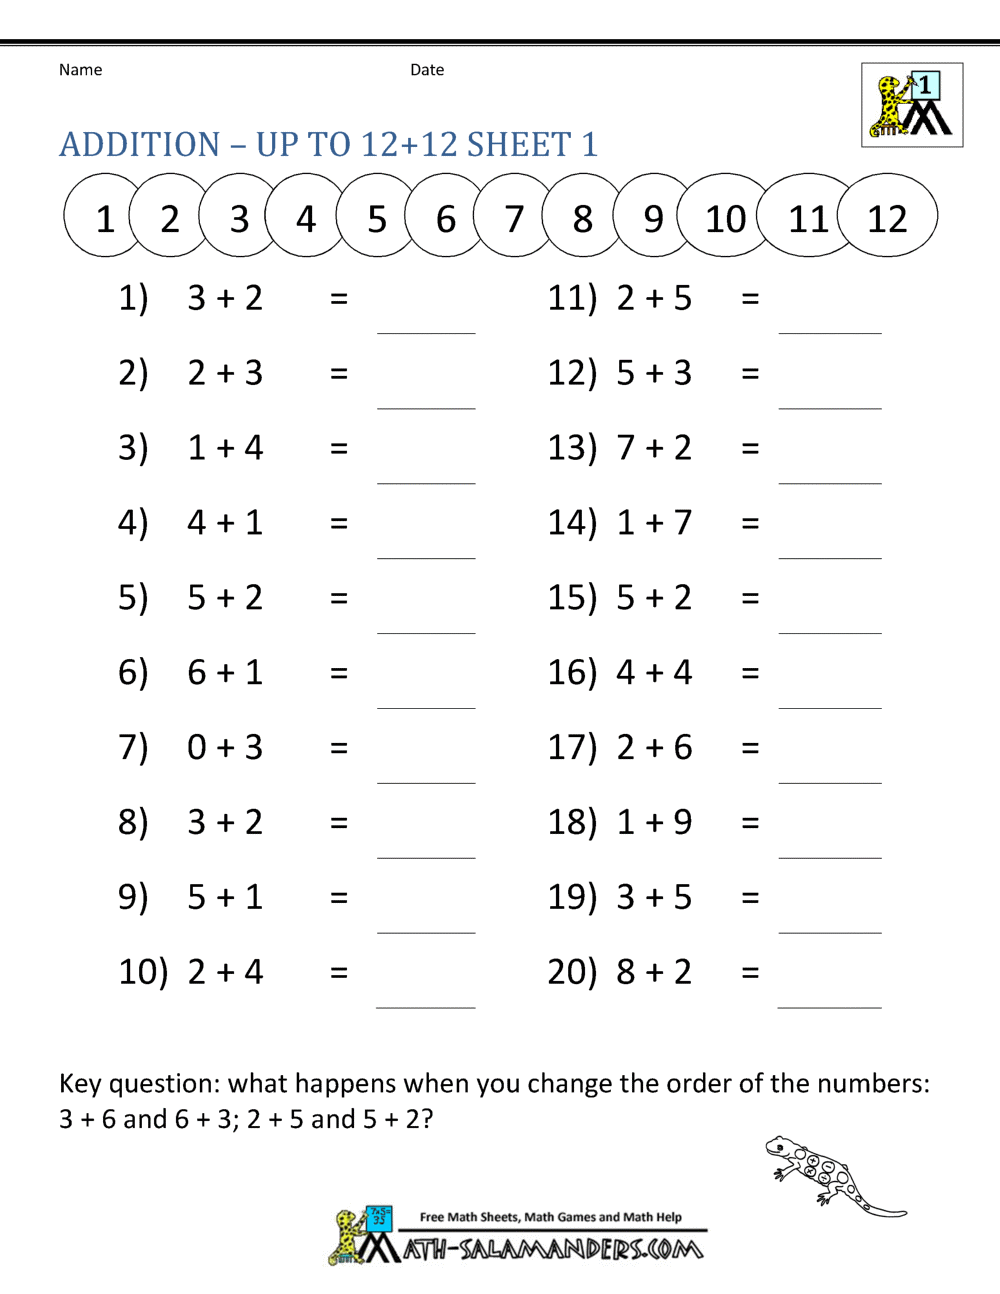 Free Math Worksheets For Grade 4